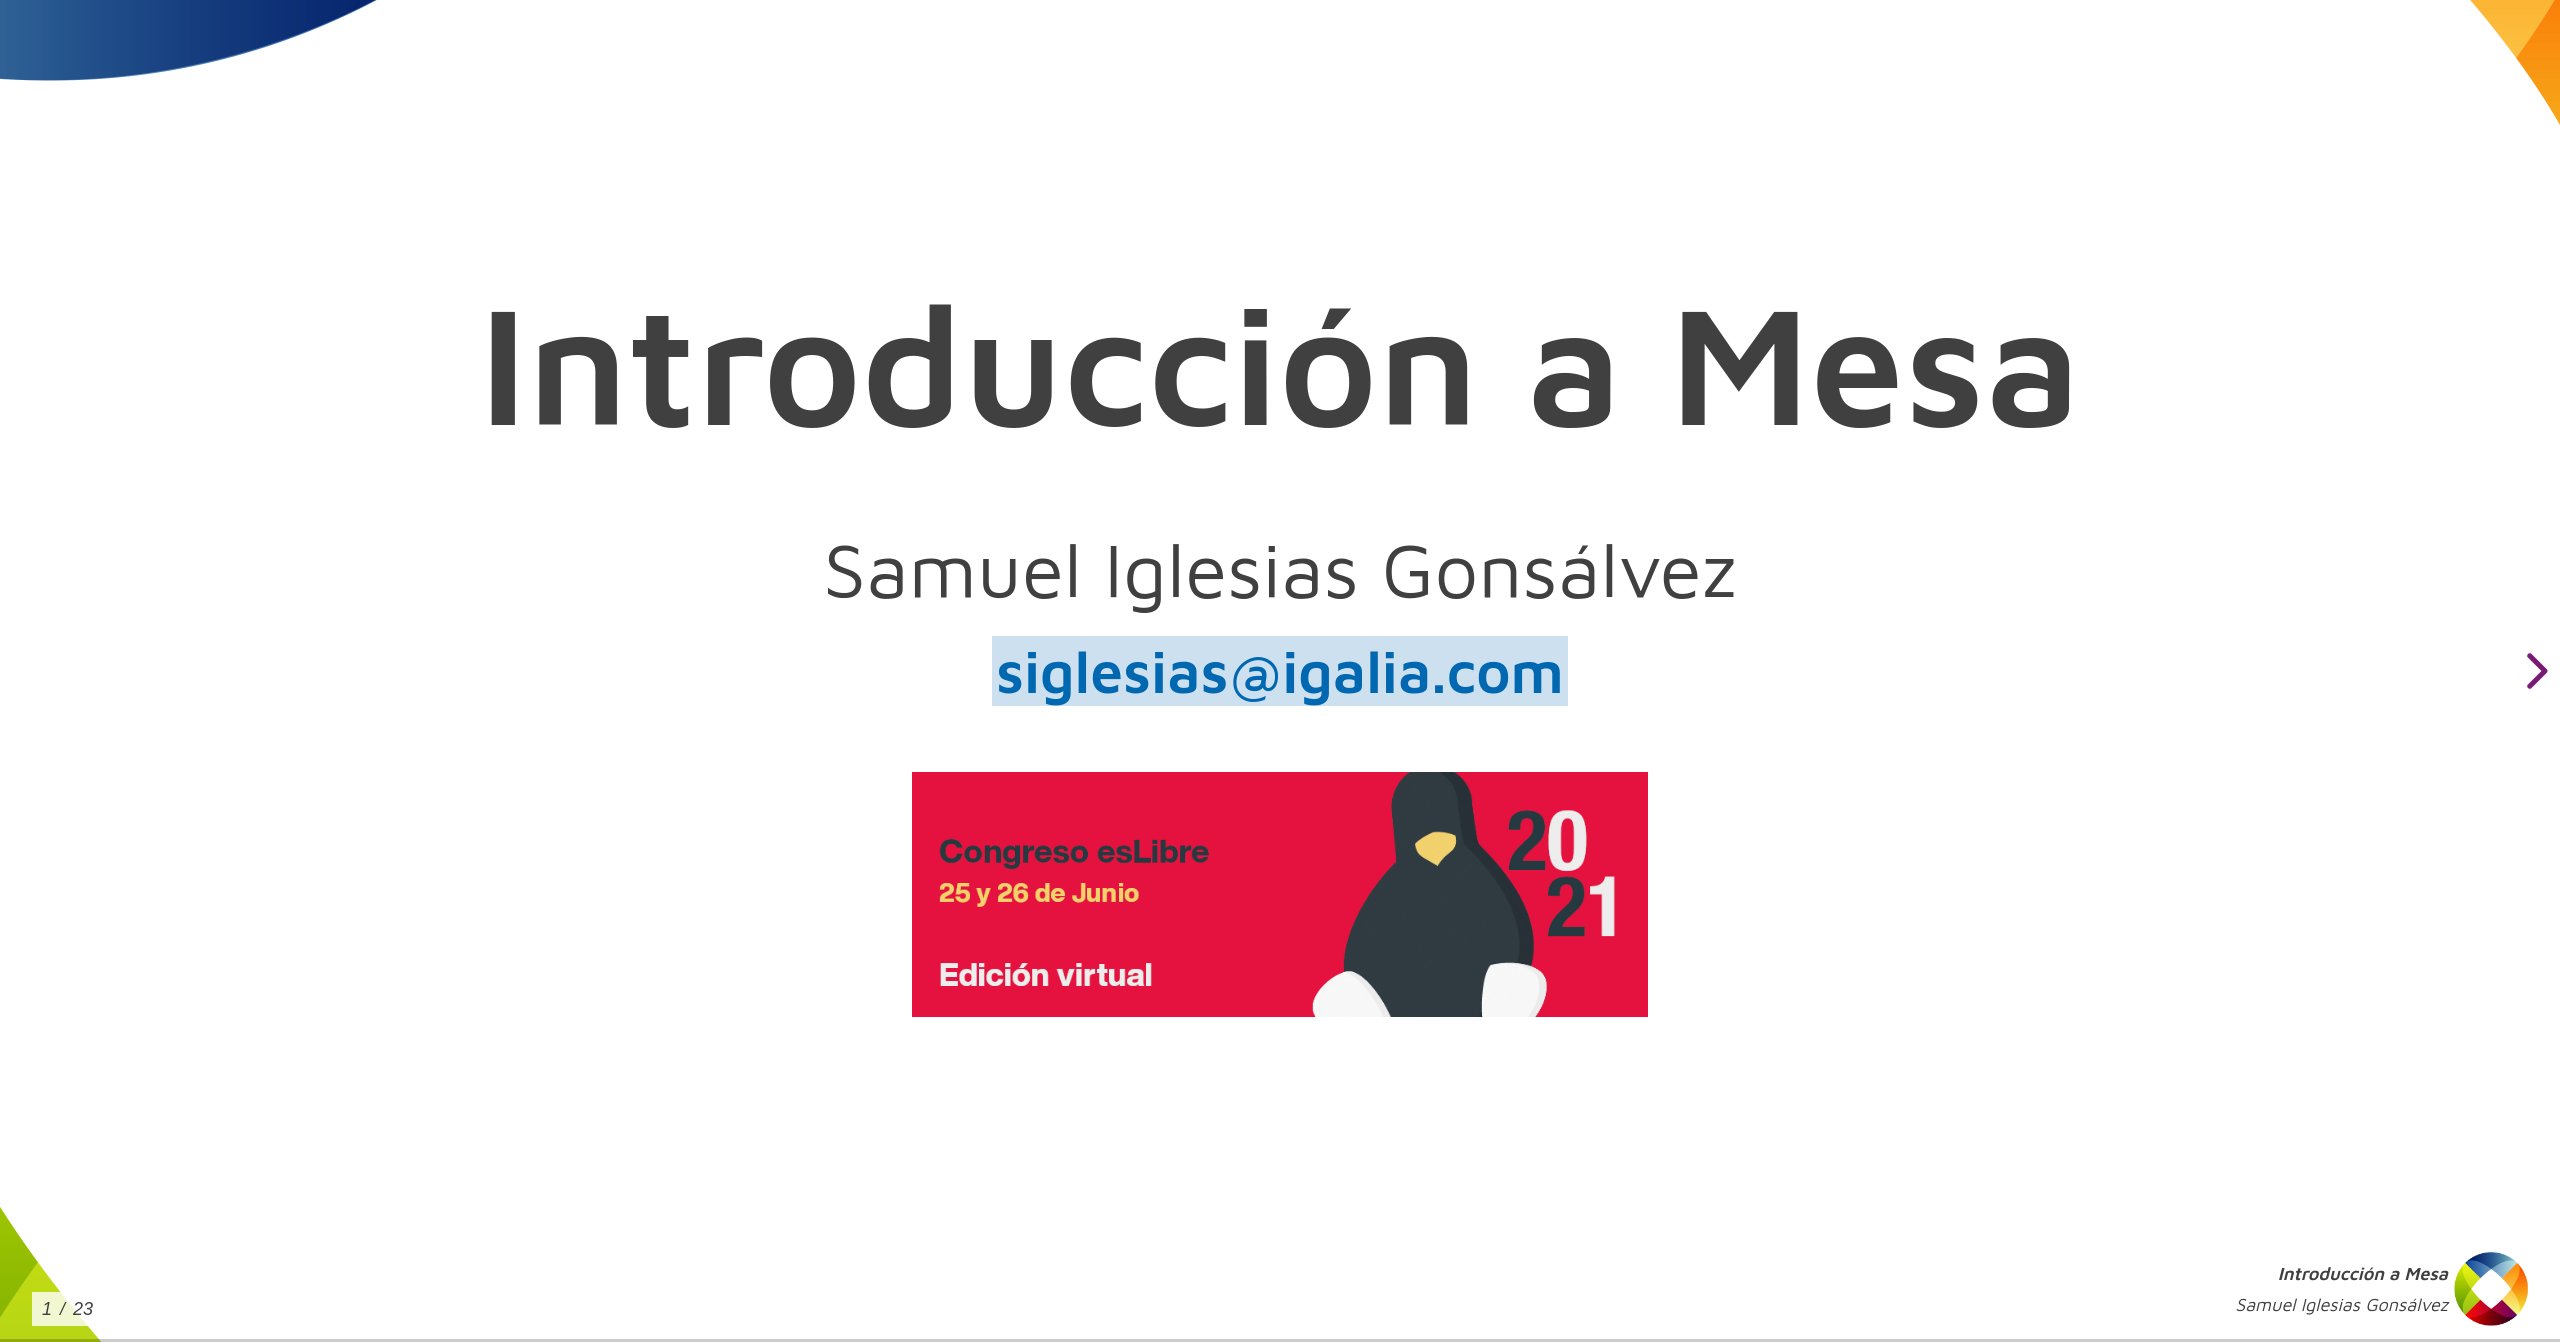 Introduction to Mesa